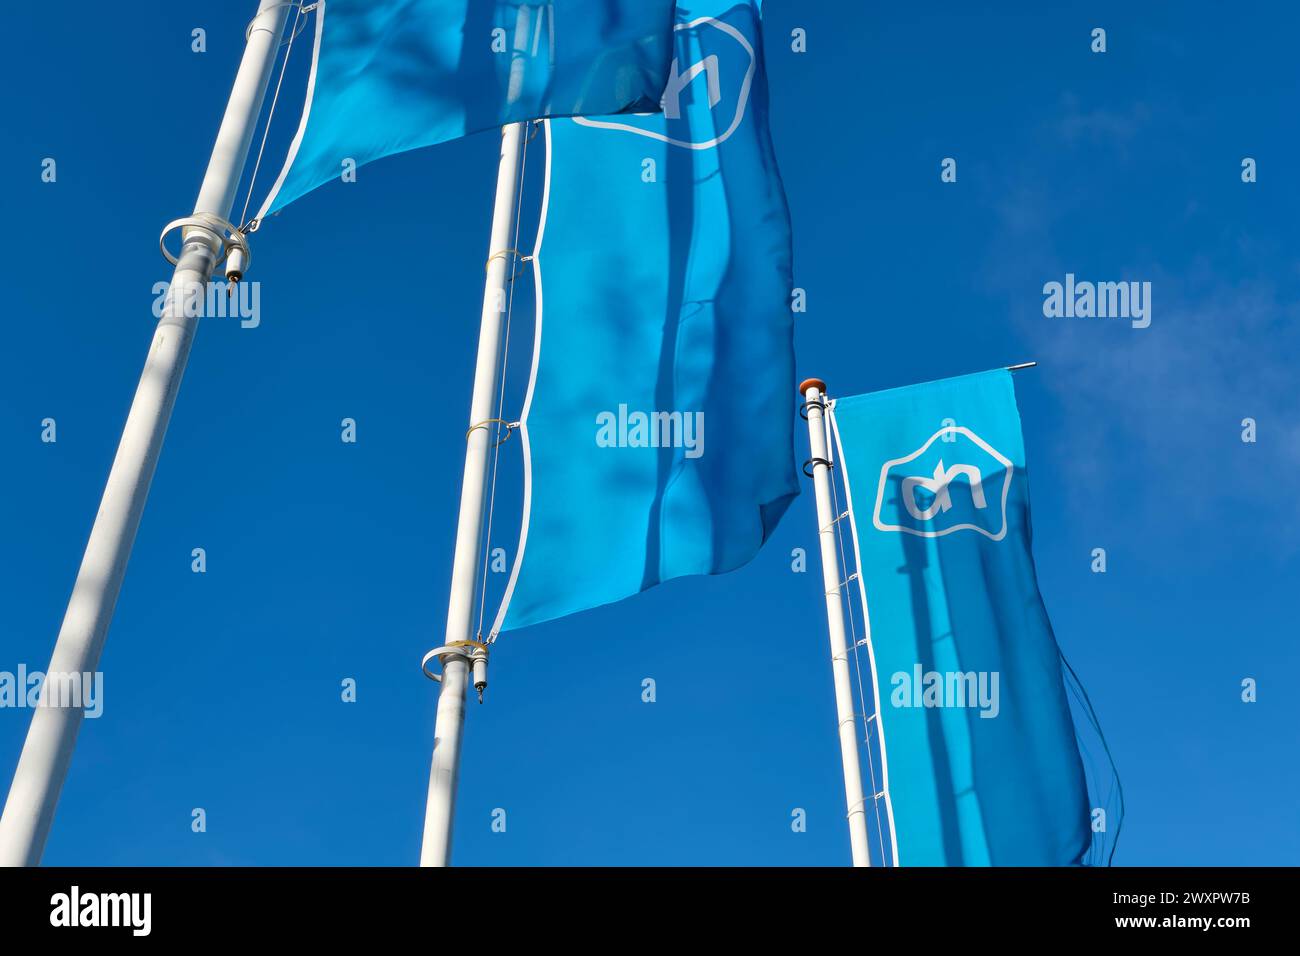 Albert Heijn logo on tree blue banners. Albert Heijn is the largest supermarket chain in the Netherlands and also has branches in Belgium. Stock Photo